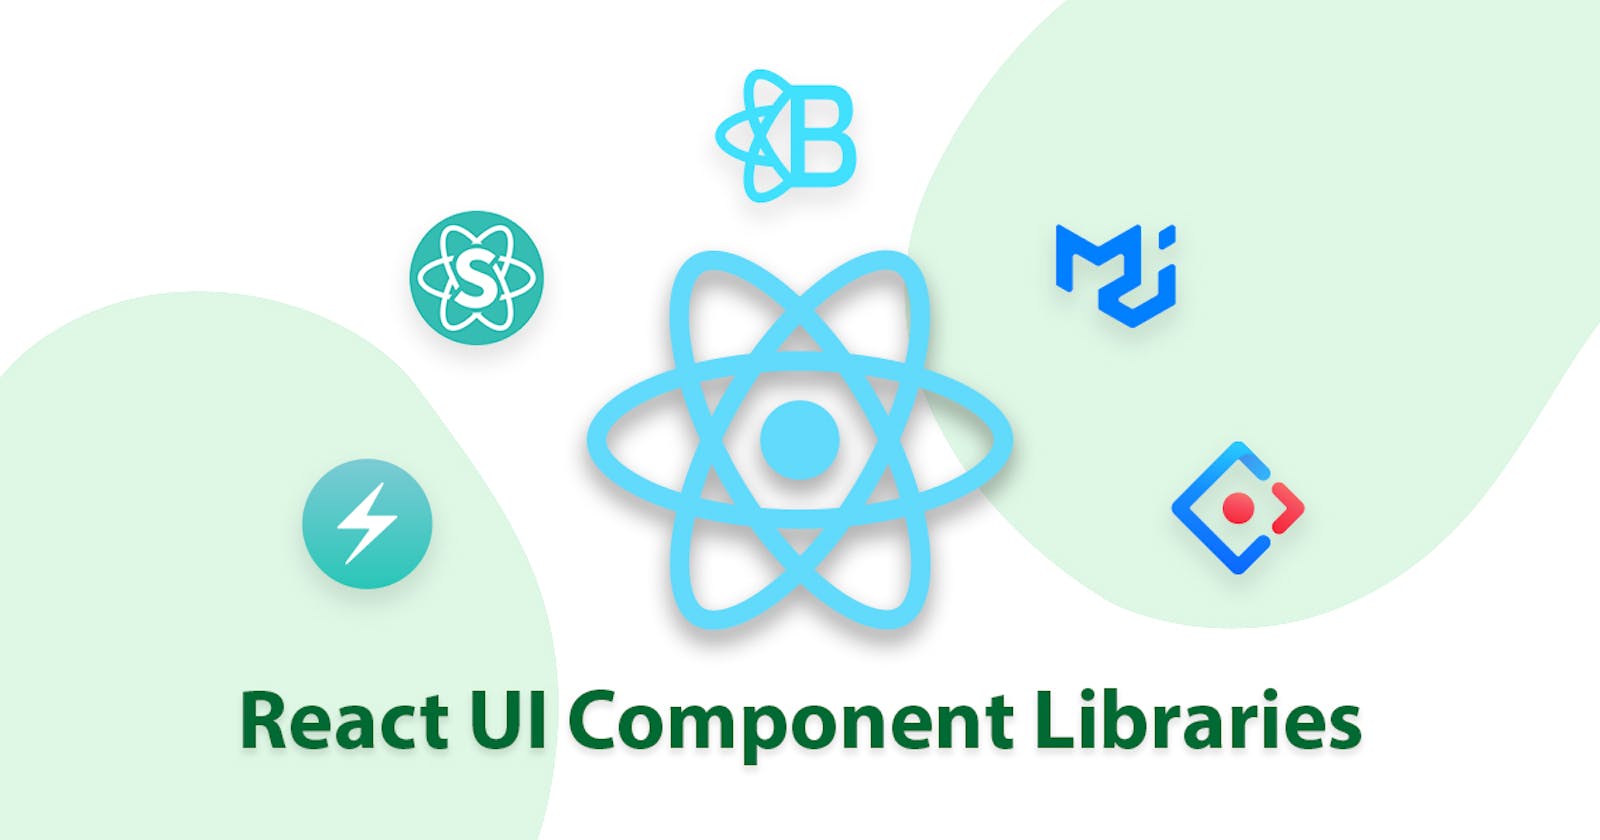 Top 5 React UI Component Libraries for Building Beautiful Interfaces